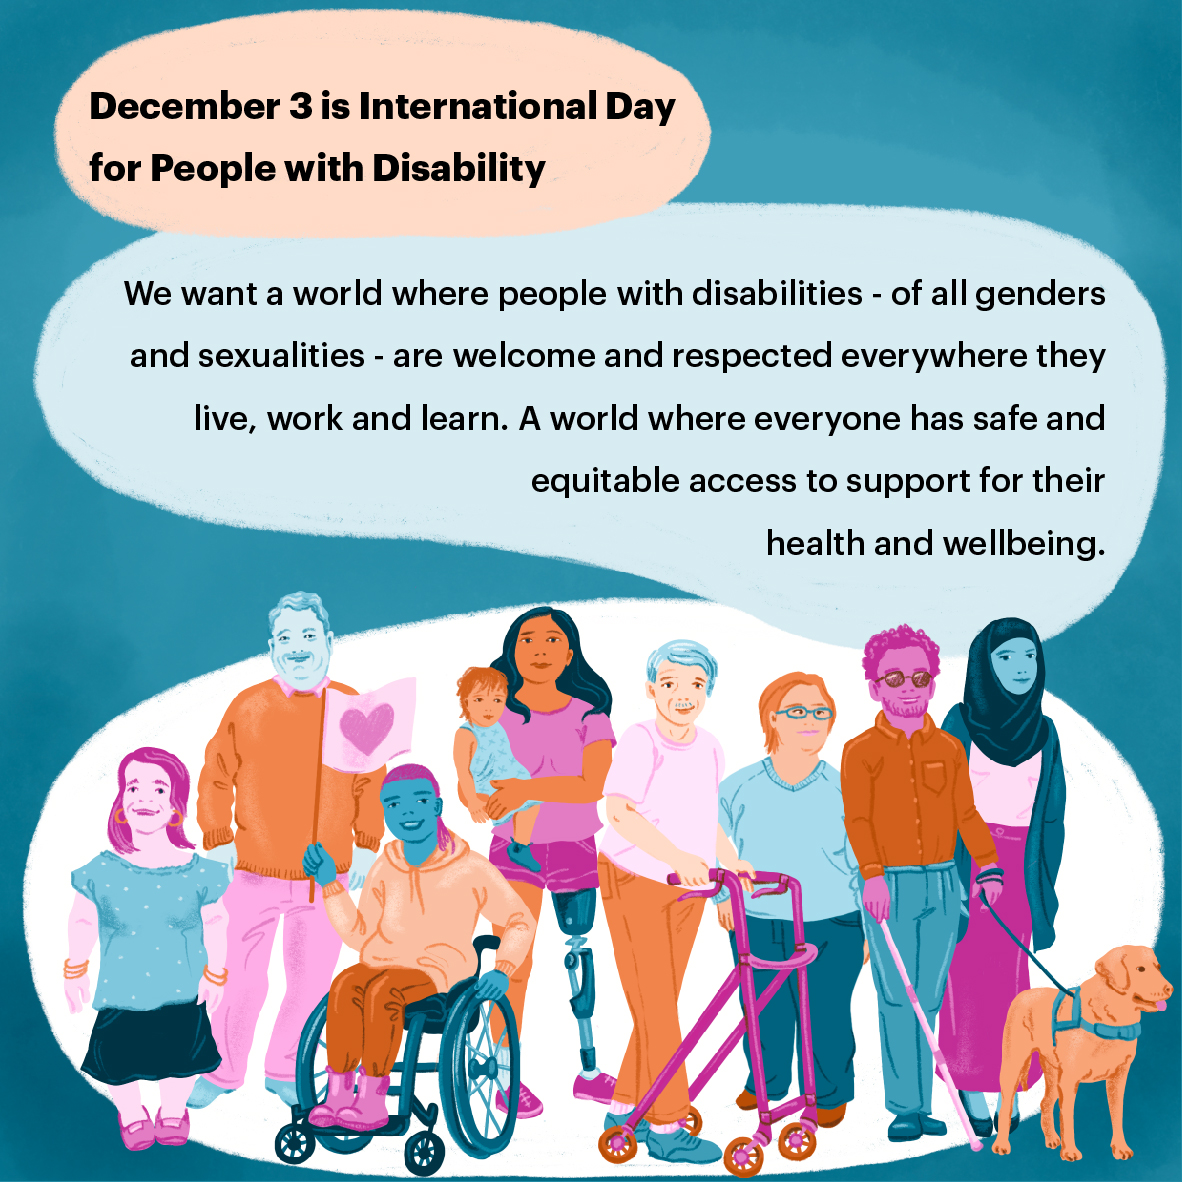 Illustration of a group of people with a disability of diverse genders and sexualities
looking happy. Text in image says: December 3 is International Day for People with Disability. We want a world where people with disabilities - of all genders and sexualities - are welcome and respected everywhere they live, work and learn. A world where everyone has safe and equitable access to support
for their health and wellbeing. 